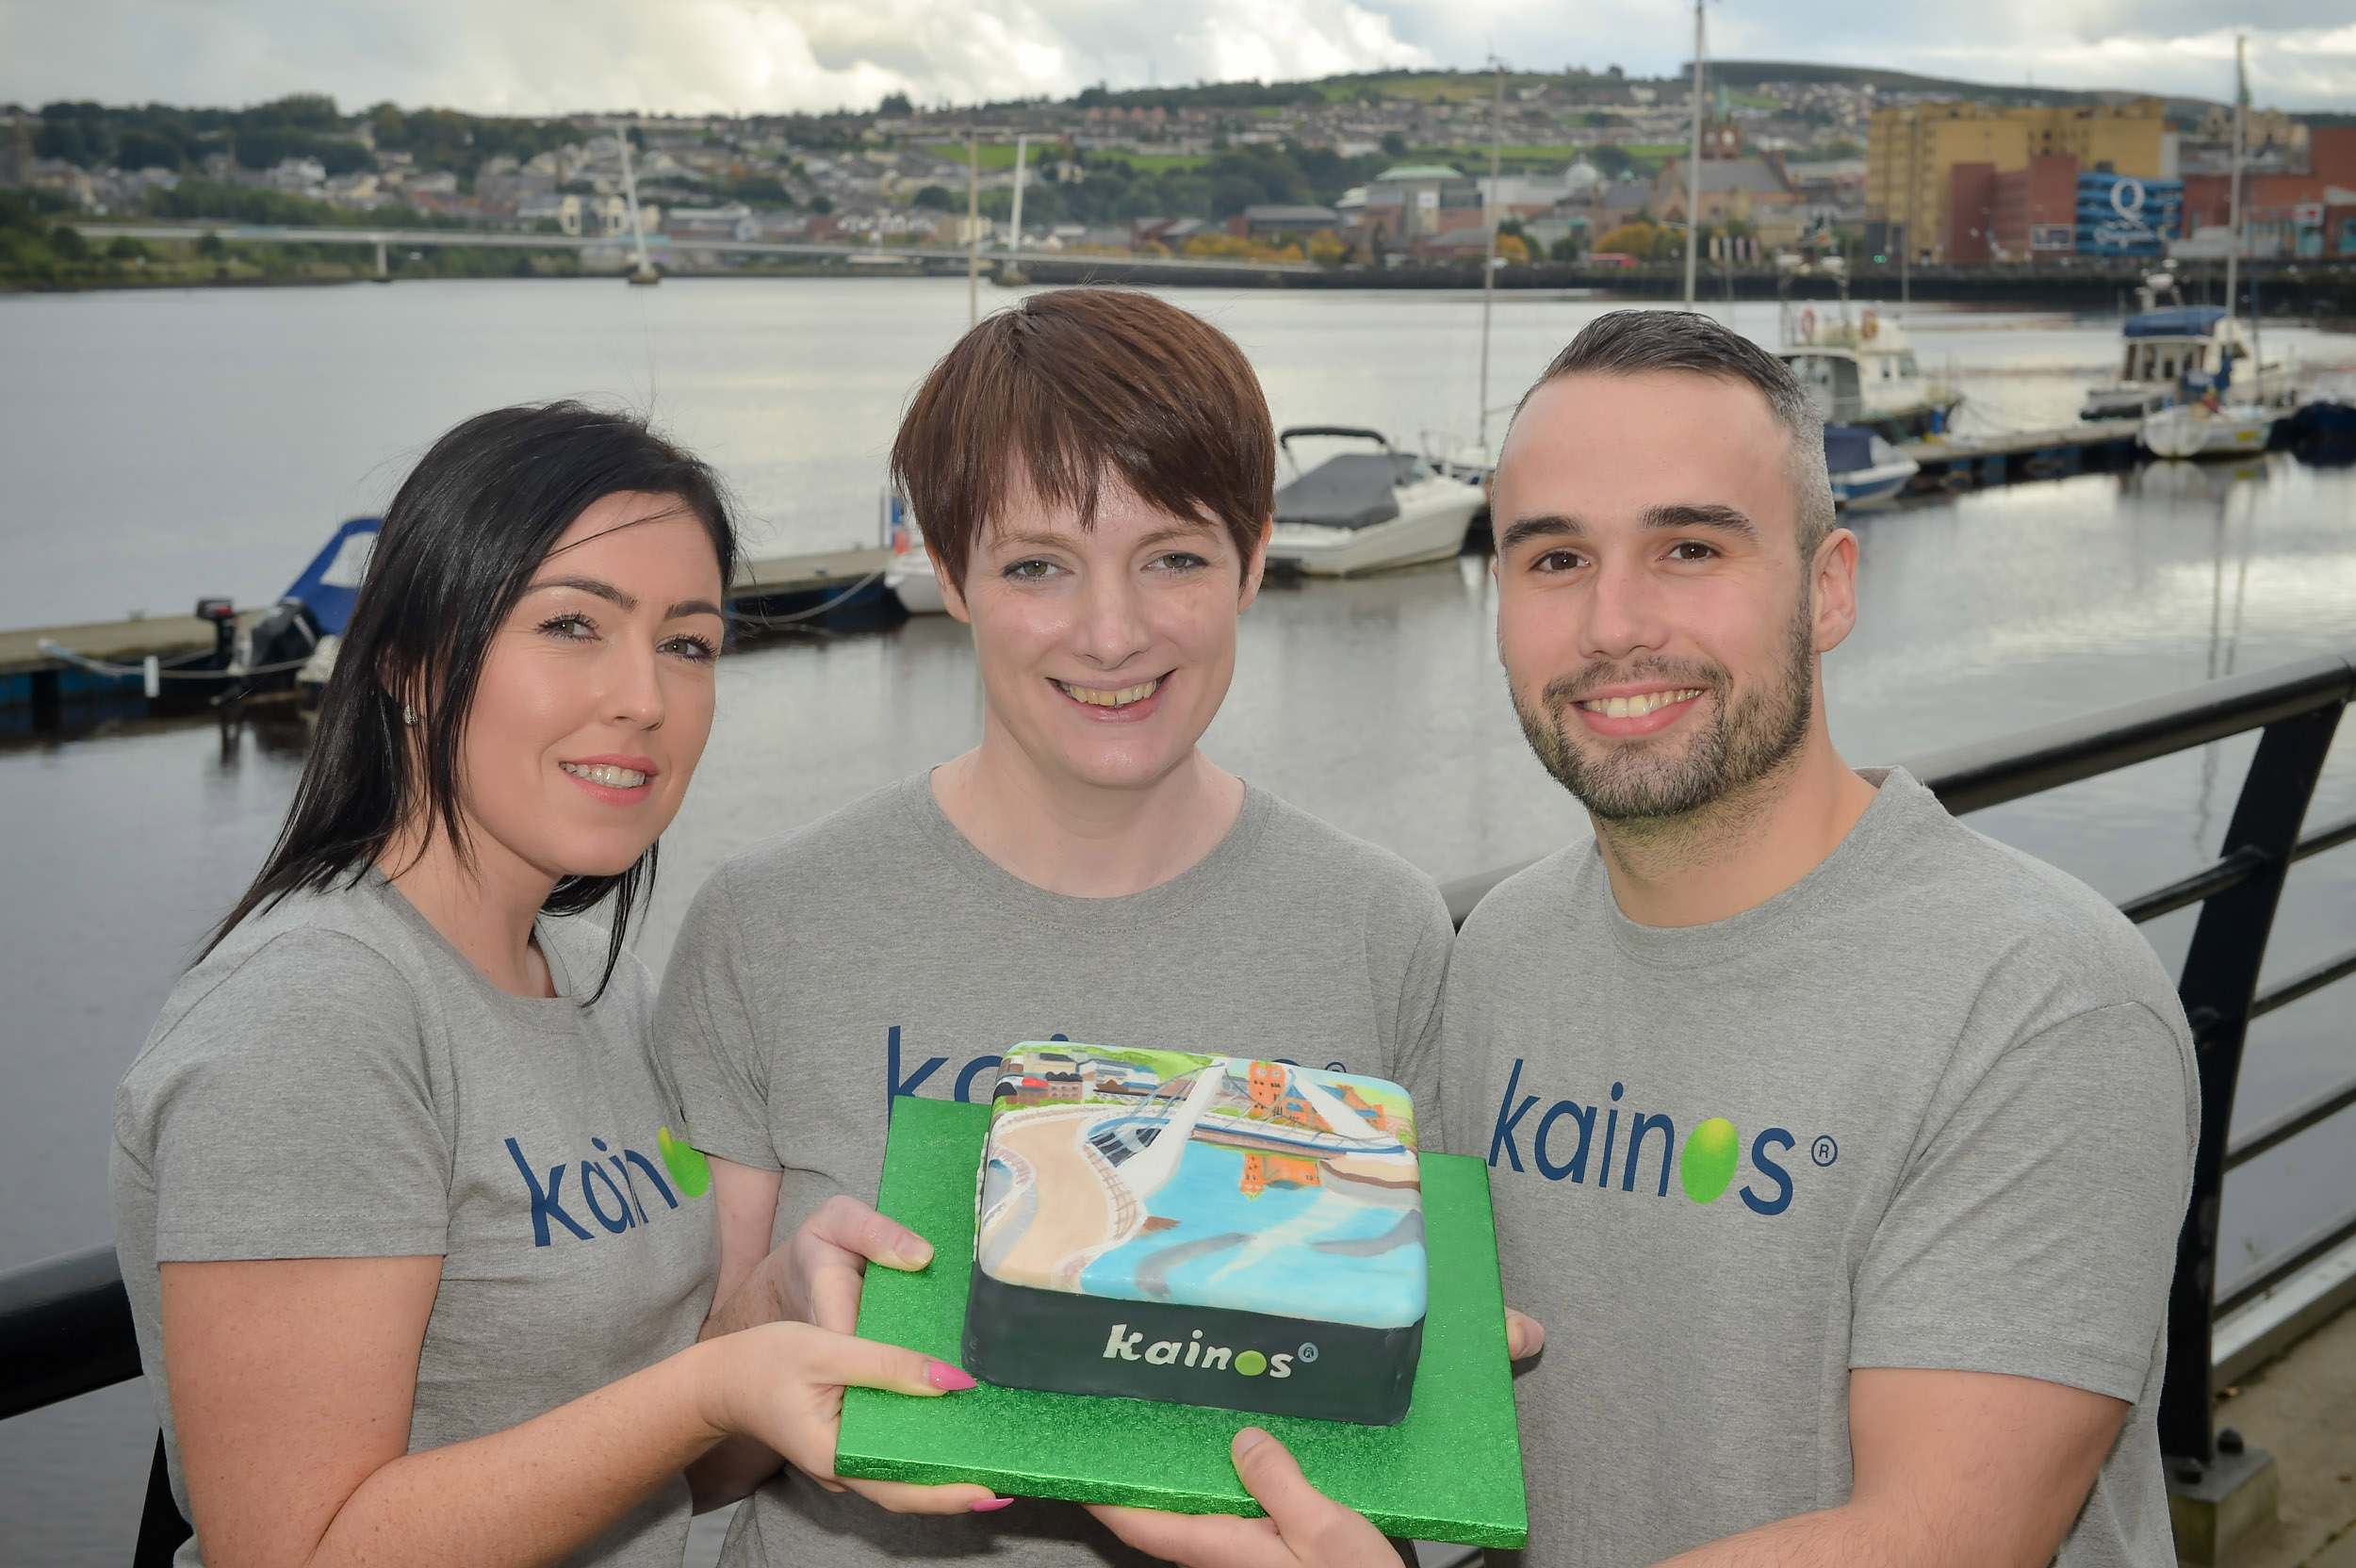 Kainos expands its digital presence in Derry